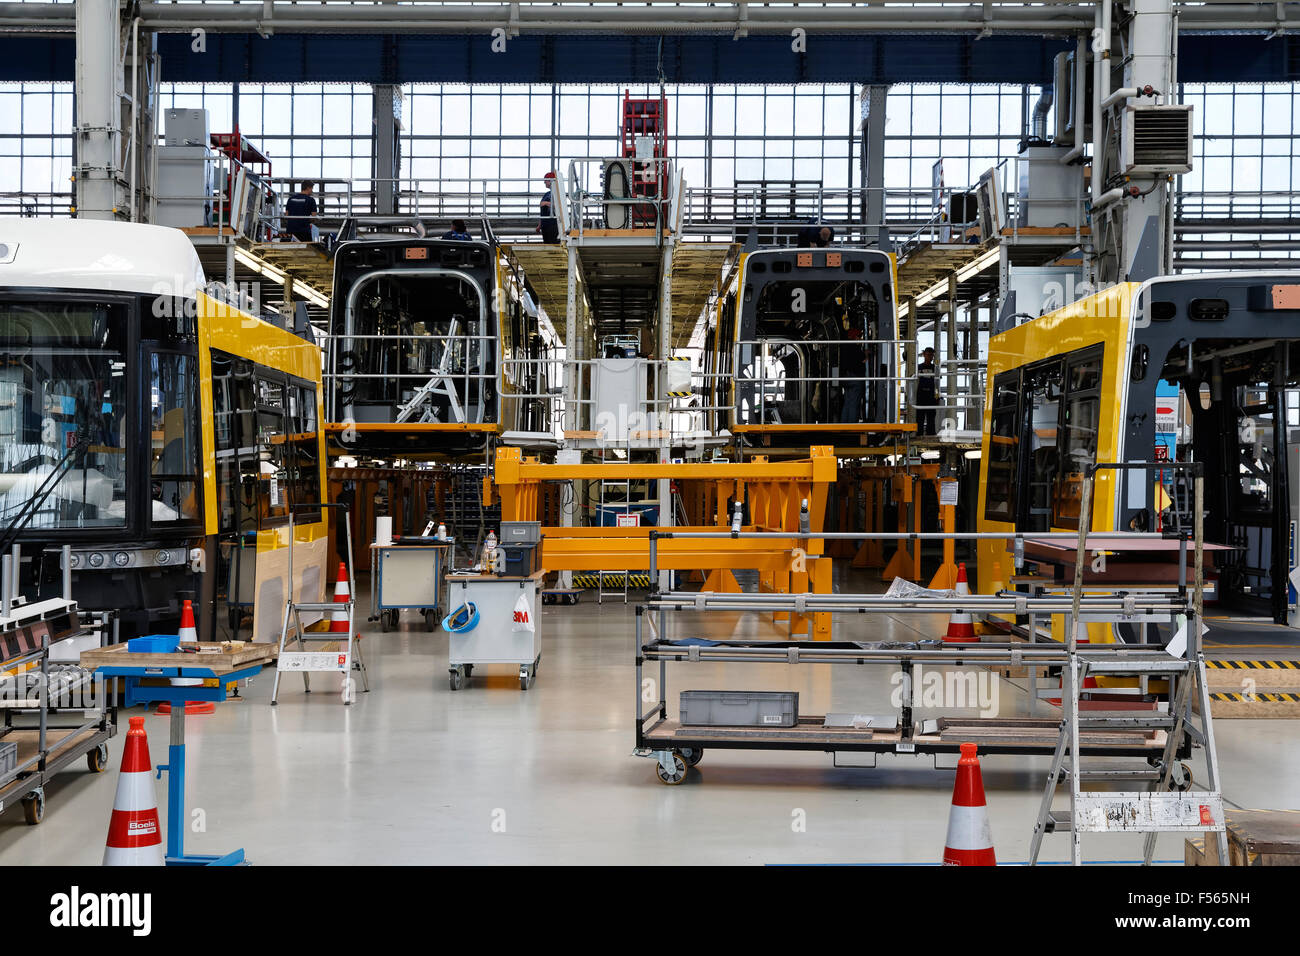 04.06.2015, Hennigsdorf, Brandenburg, Germany - Rolling stock production in Bombardier Transportation in Hennigsdorf Brandenburg plant. The picture shows the production hall with EMUs type Talent 2 for regional traffic. In the foreground car bodies for FLEXITY trams to the BVG BVG. EJH150604D614CAROEX.JPG - NOT for SALE in G E R M A N Y, A U S T R I A, S W I T Z E R L A N D [MODEL RELEASE: NOT APPLICABLE, PROPERTY RELEASE: NO (c) caro photo agency / Heinrich, http://www.caro-images.pl, info@carofoto.pl - In case of using the picture for non-journalistic purposes, please contact the agency - th Stock Photo